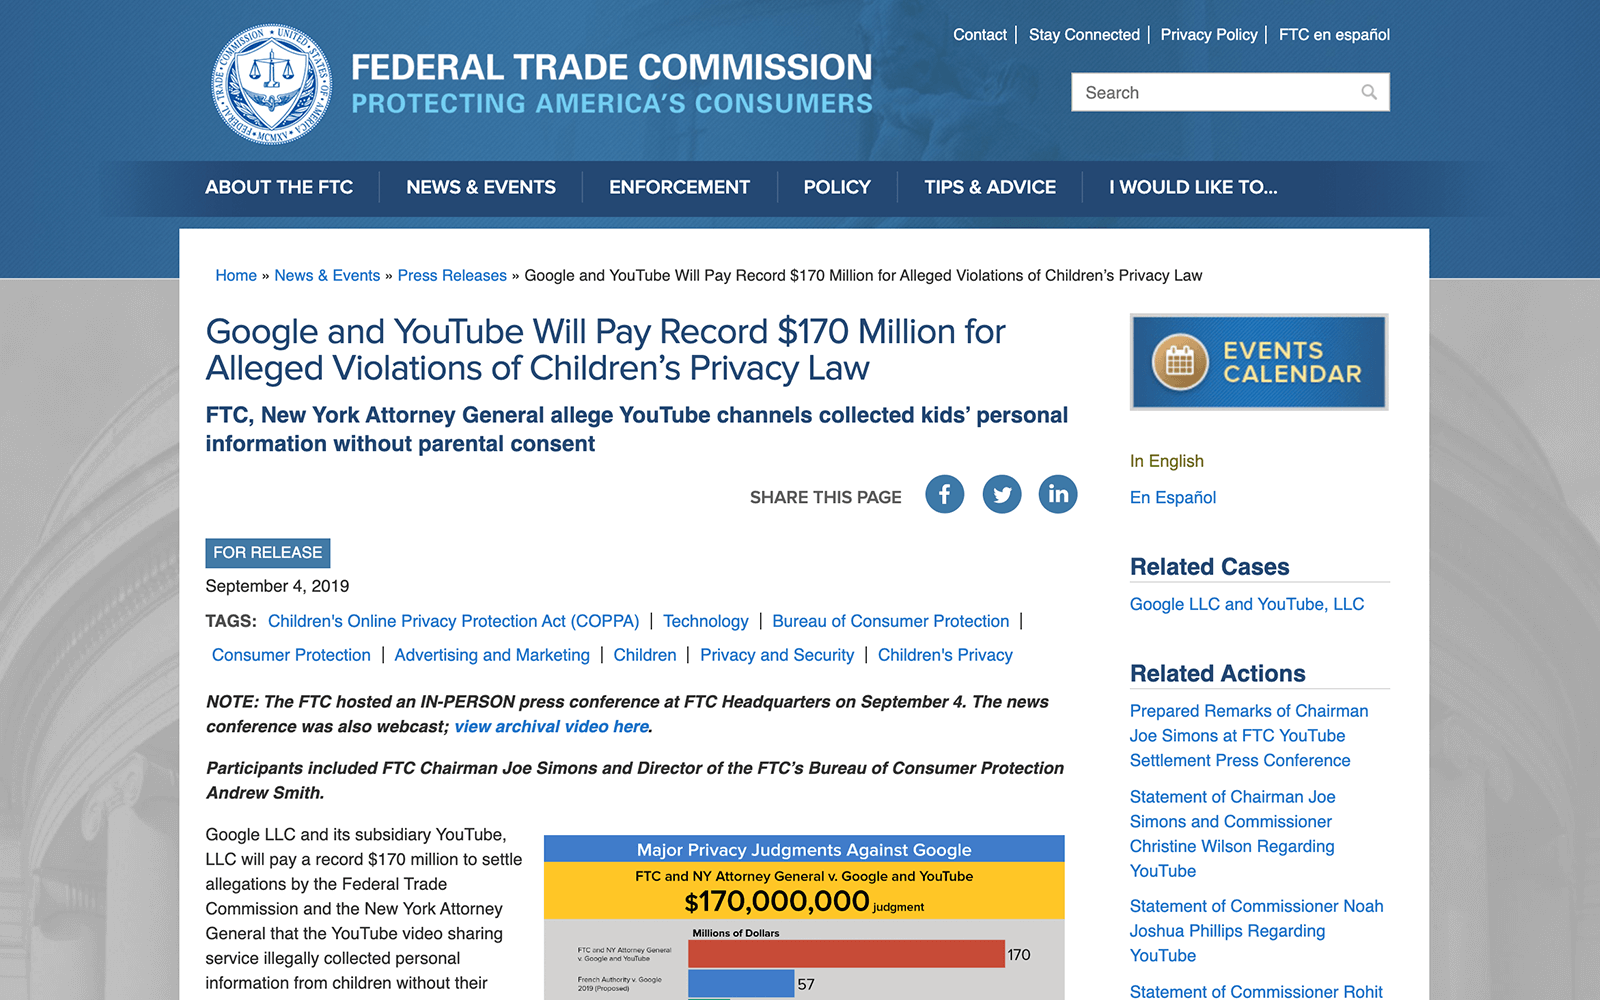 https://www.ftc.gov/news-events/press-releases/2019/09/google-youtube-will-pay-record-170-million-alleged-violations 2019年11月18日最終アクセス